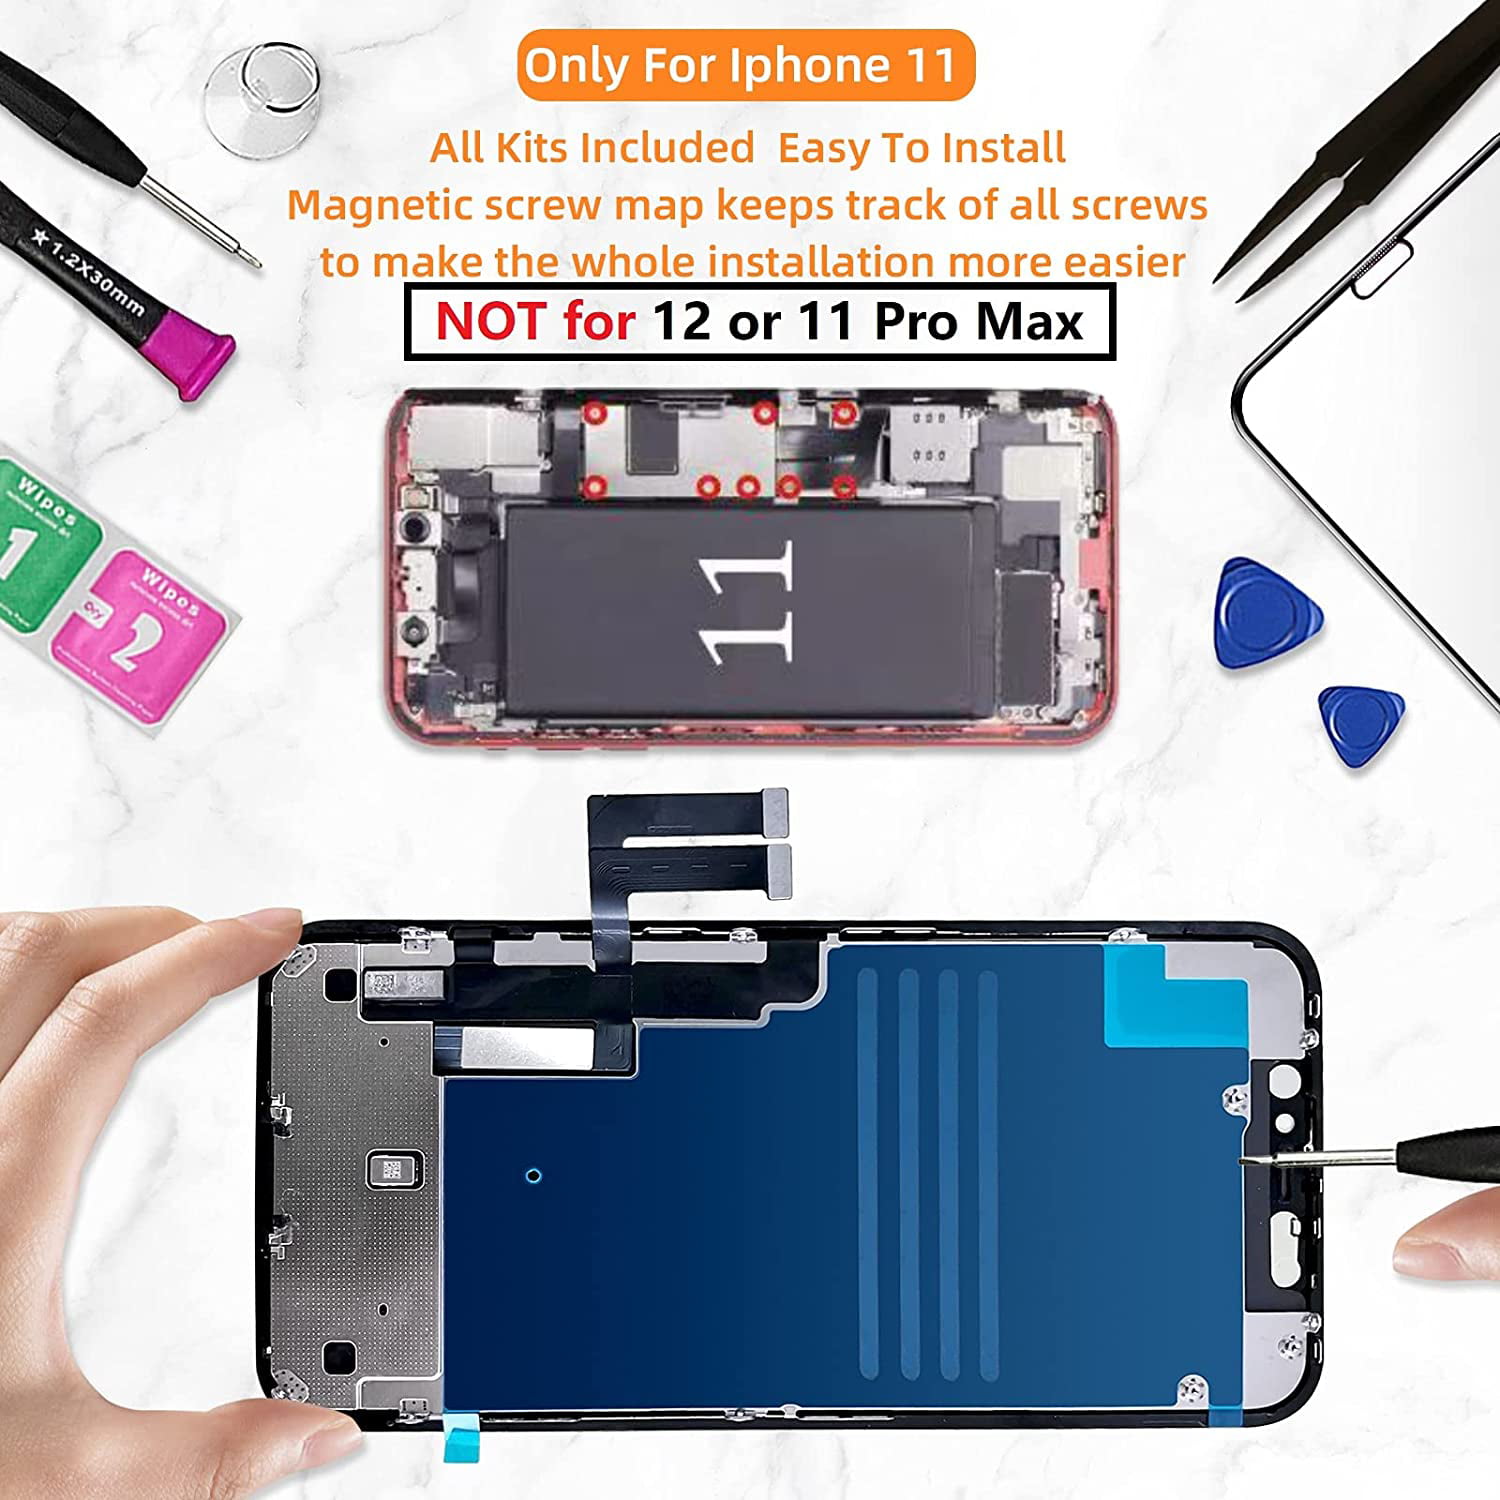 Compatible with iphone 11 A2111 for iPhone 11 Screen Replacement kit A2223 6.1/'/' A2221 3D Touch LCD Screen Display Digitizer Full Assembly with Protector and Adhesive Strips